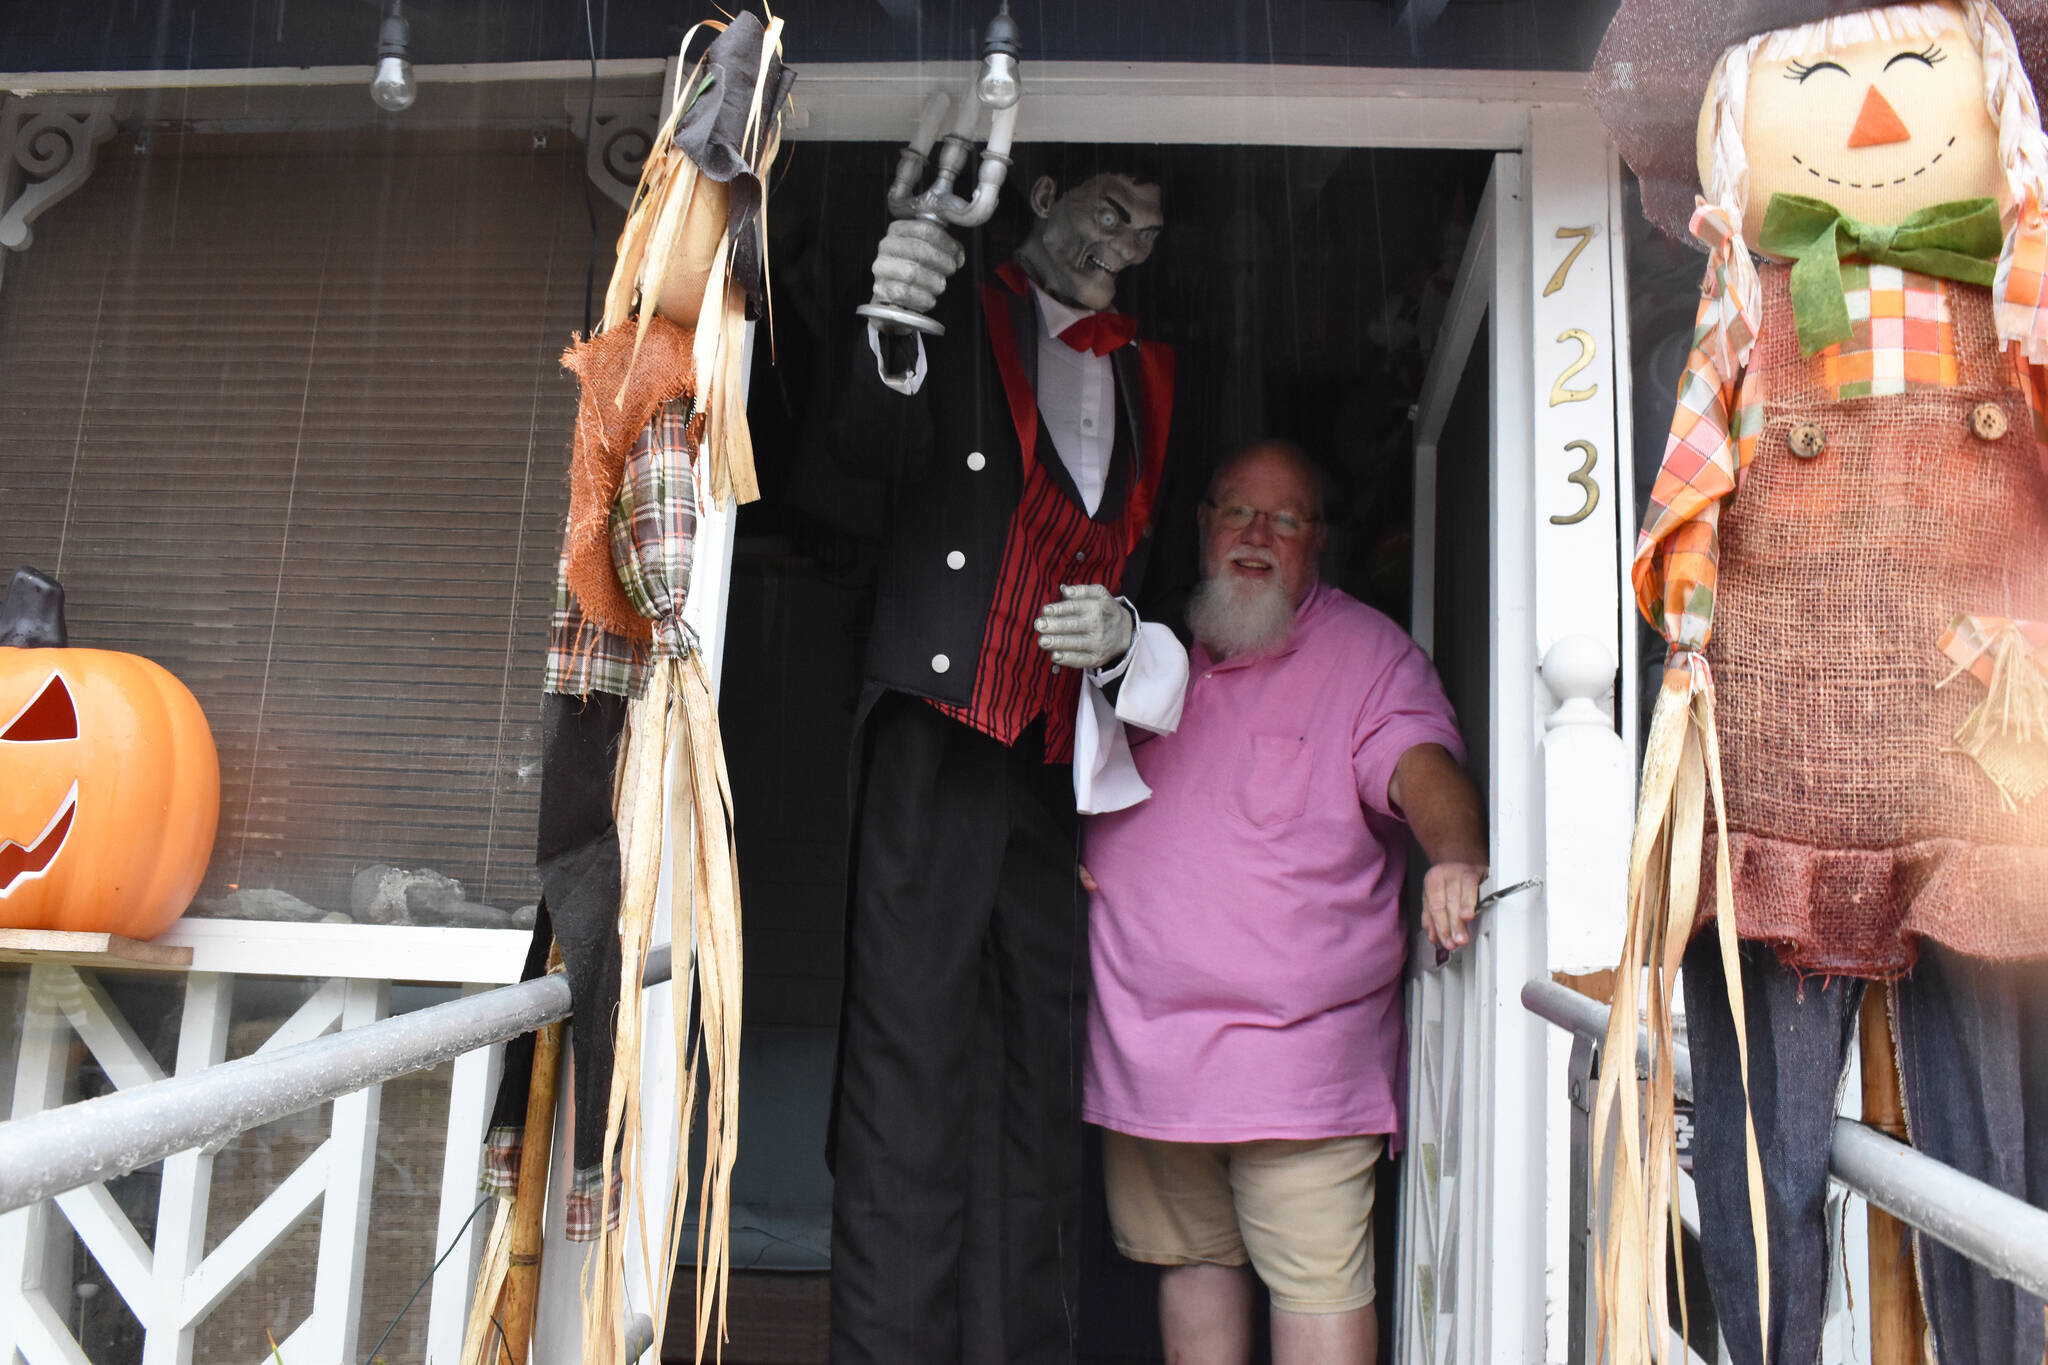 Matthew N. Wells / The Daily World
Kevin Farley, right, stands with one of his ghoulish Halloween pals just inside the front door to his Montesano home on Tuesday afternoon.